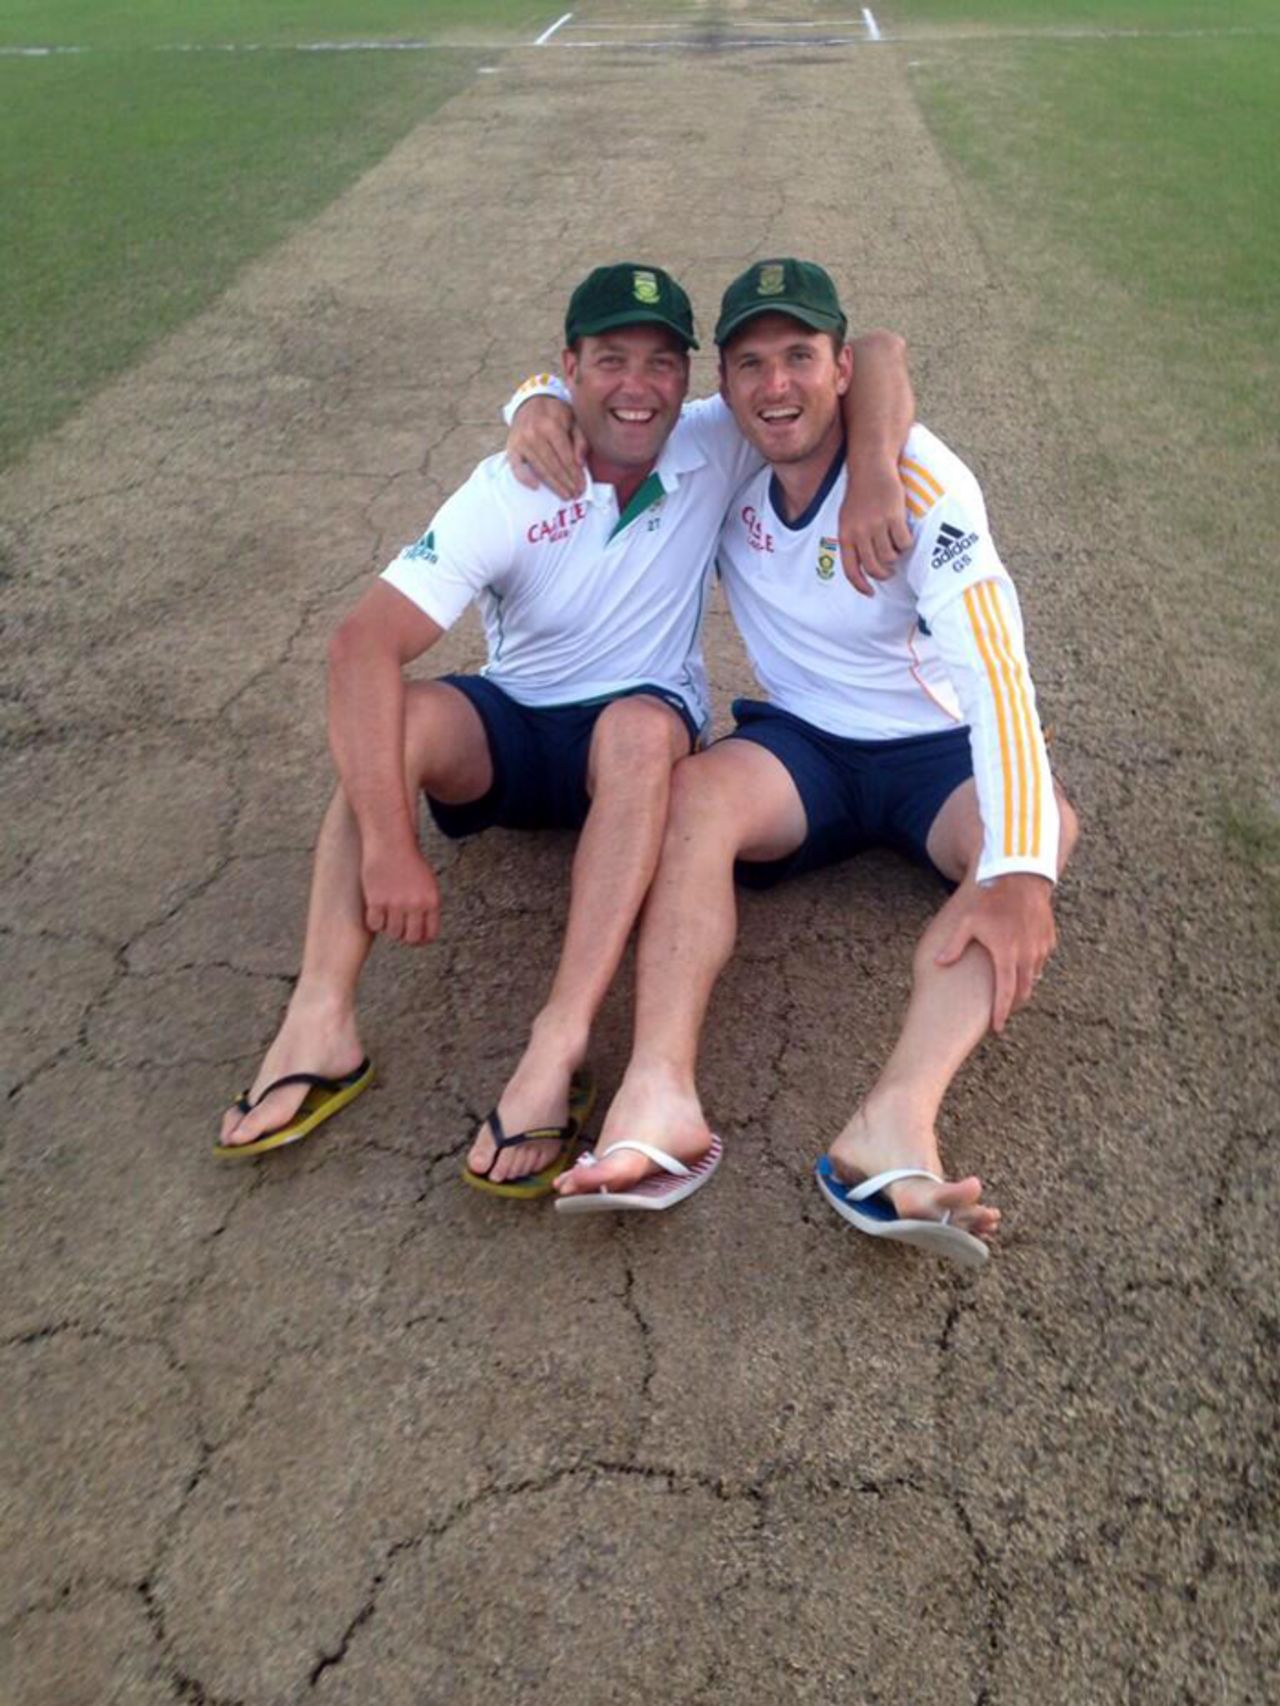 Jacques Kallis and Graeme Smith relax on the Kingsmead pitch, South Africa v India, 2nd Test, Durban, 5th day, December 30, 2013